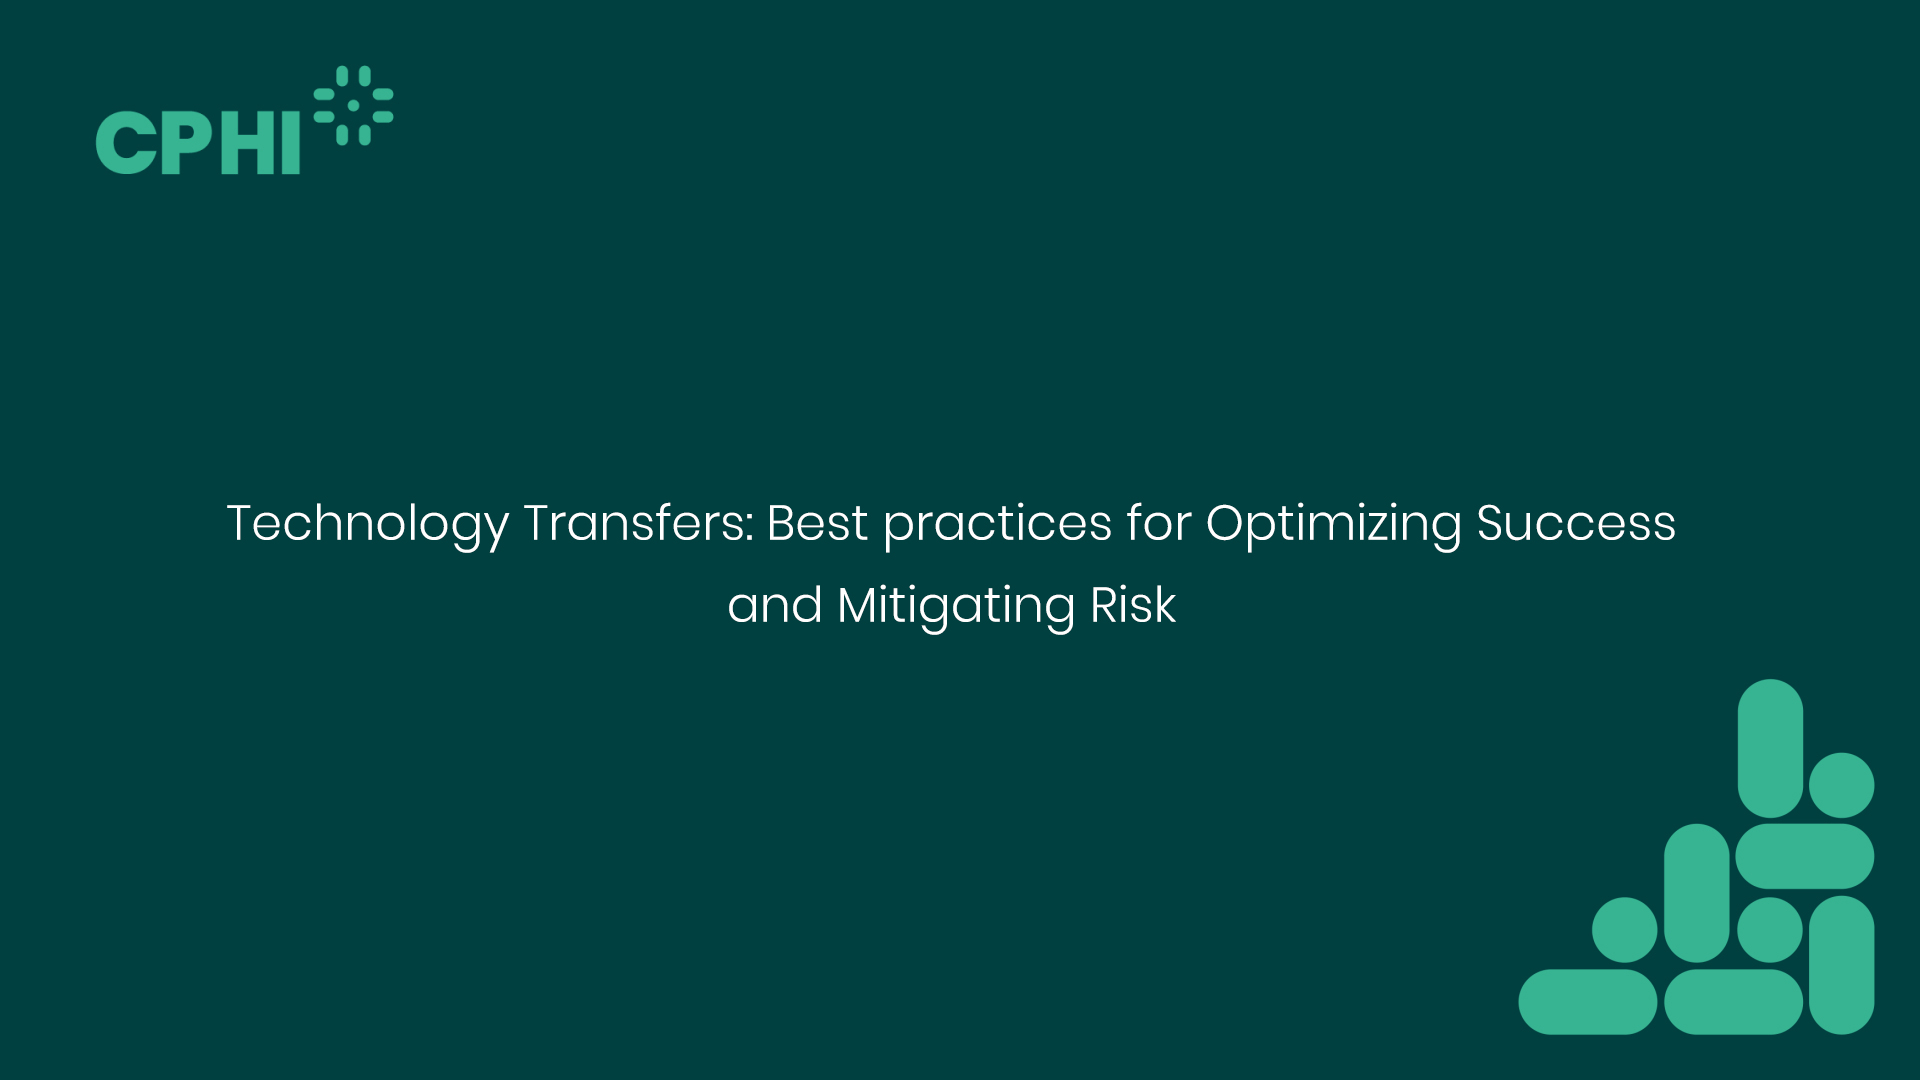 Technology Transfers: Best practices for Optimizing Success and Mitigating Risk